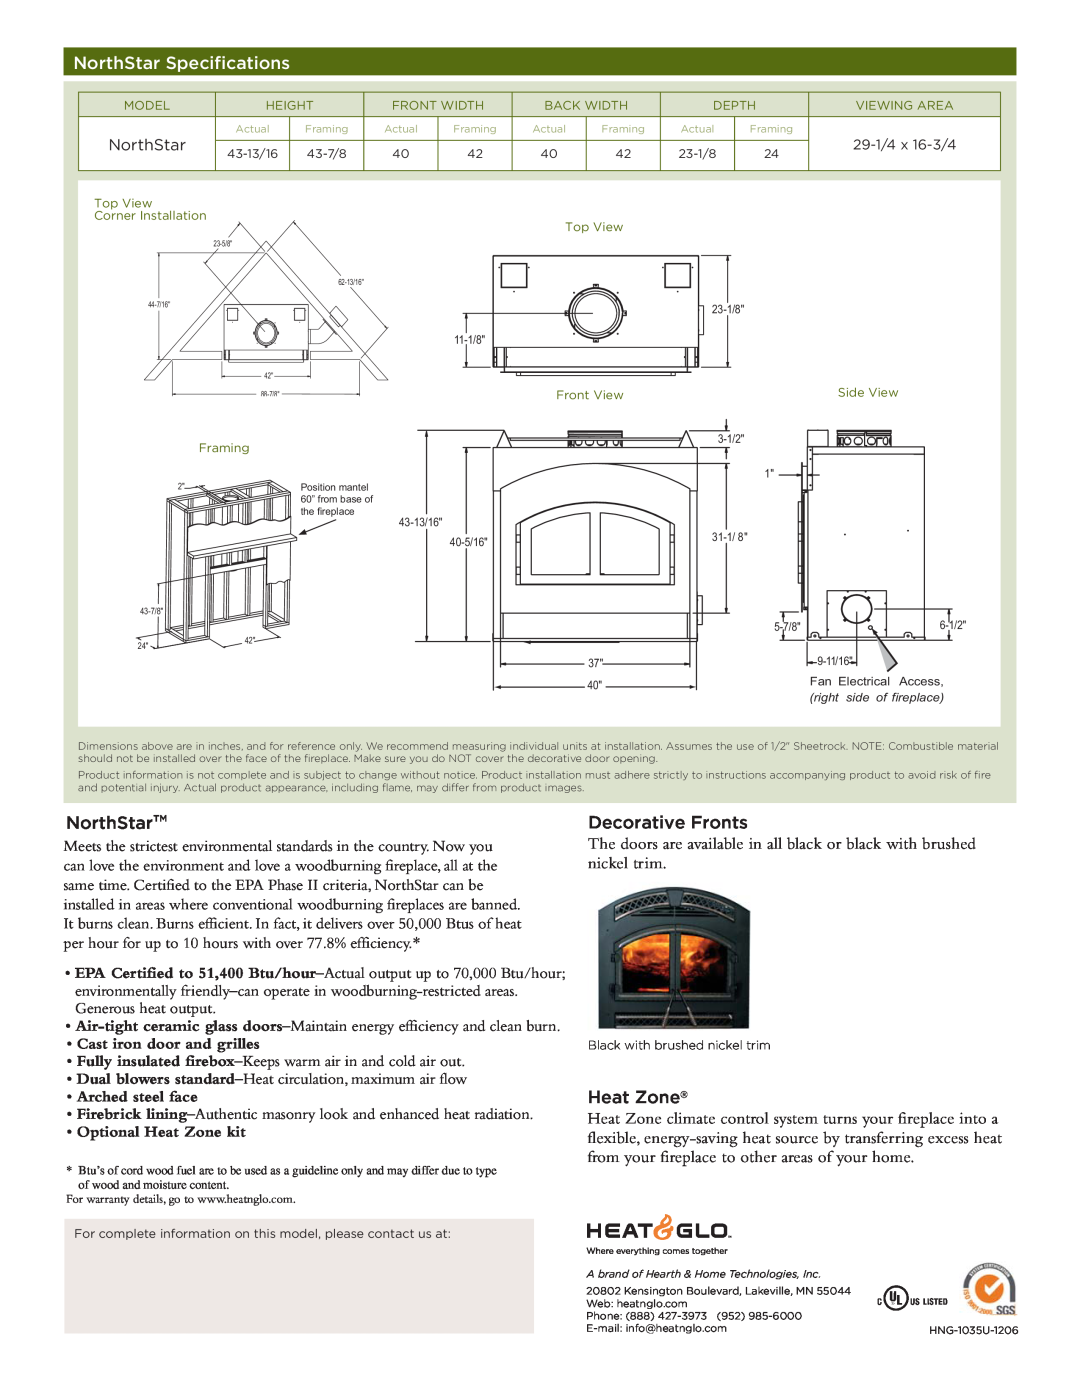 Hearth and Home Technologies EPA Phase II manual NorthStar Specifications, NorthStarTM, Decorative Fronts, Heat Zone 